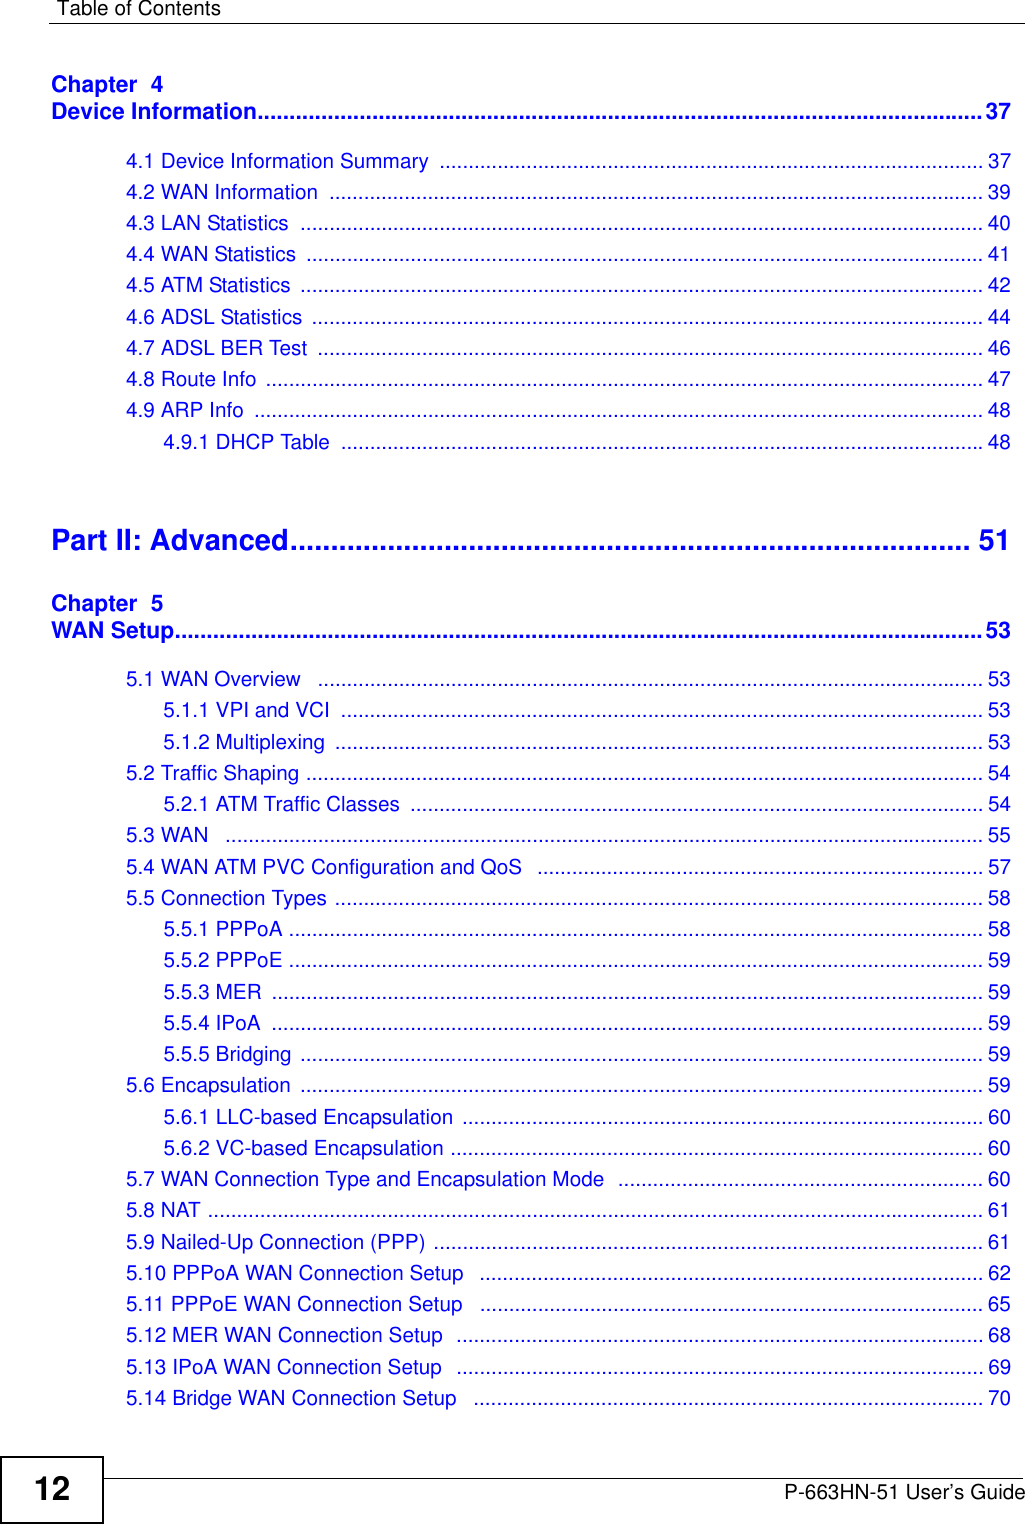 Table of ContentsP-663HN-51 User’s Guide12Chapter  4Device Information..................................................................................................................374.1 Device Information Summary  .............................................................................................. 374.2 WAN Information  ................................................................................................................. 394.3 LAN Statistics  ...................................................................................................................... 404.4 WAN Statistics  ..................................................................................................................... 414.5 ATM Statistics  ...................................................................................................................... 424.6 ADSL Statistics .................................................................................................................... 444.7 ADSL BER Test  ................................................................................................................... 464.8 Route Info  ............................................................................................................................ 474.9 ARP Info  .............................................................................................................................. 484.9.1 DHCP Table  ...............................................................................................................48Part II: Advanced.................................................................................... 51Chapter  5WAN Setup...............................................................................................................................535.1 WAN Overview   ................................................................................................................... 535.1.1 VPI and VCI  ............................................................................................................... 535.1.2 Multiplexing  ................................................................................................................ 535.2 Traffic Shaping ..................................................................................................................... 545.2.1 ATM Traffic Classes  ................................................................................................... 545.3 WAN   ................................................................................................................................... 555.4 WAN ATM PVC Configuration and QoS   ............................................................................. 575.5 Connection Types ................................................................................................................ 585.5.1 PPPoA ........................................................................................................................ 585.5.2 PPPoE ........................................................................................................................ 595.5.3 MER  ........................................................................................................................... 595.5.4 IPoA  ........................................................................................................................... 595.5.5 Bridging ...................................................................................................................... 595.6 Encapsulation  ...................................................................................................................... 595.6.1 LLC-based Encapsulation .......................................................................................... 605.6.2 VC-based Encapsulation ............................................................................................ 605.7 WAN Connection Type and Encapsulation Mode  ............................................................... 605.8 NAT ...................................................................................................................................... 615.9 Nailed-Up Connection (PPP) ............................................................................................... 615.10 PPPoA WAN Connection Setup   ....................................................................................... 625.11 PPPoE WAN Connection Setup  ....................................................................................... 655.12 MER WAN Connection Setup  ........................................................................................... 685.13 IPoA WAN Connection Setup  ........................................................................................... 695.14 Bridge WAN Connection Setup   ........................................................................................ 70